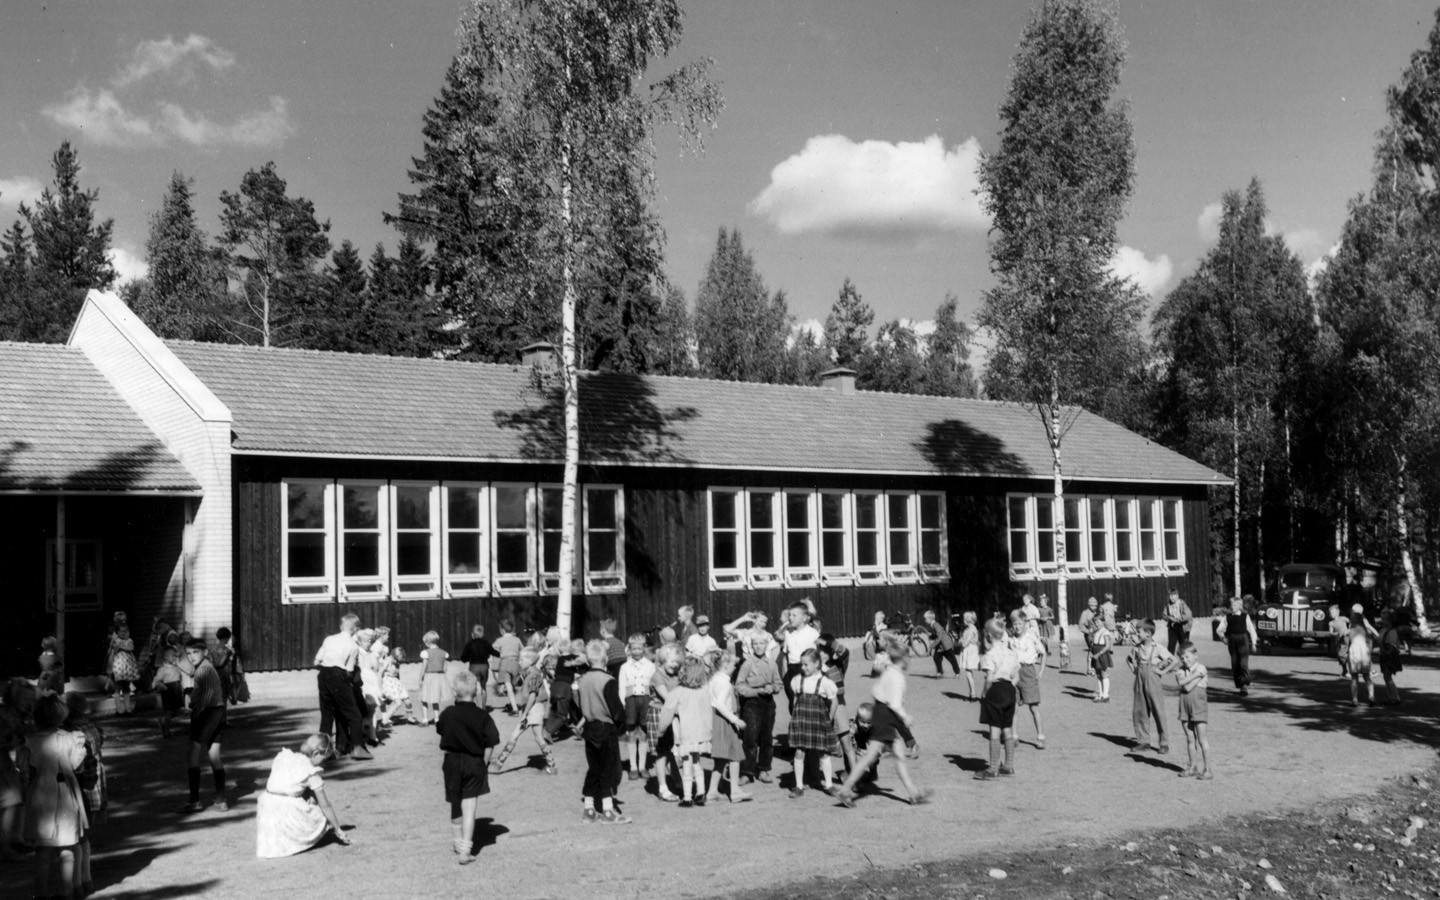 An old black and white picture of a wooden school where there are children playing in the yard.